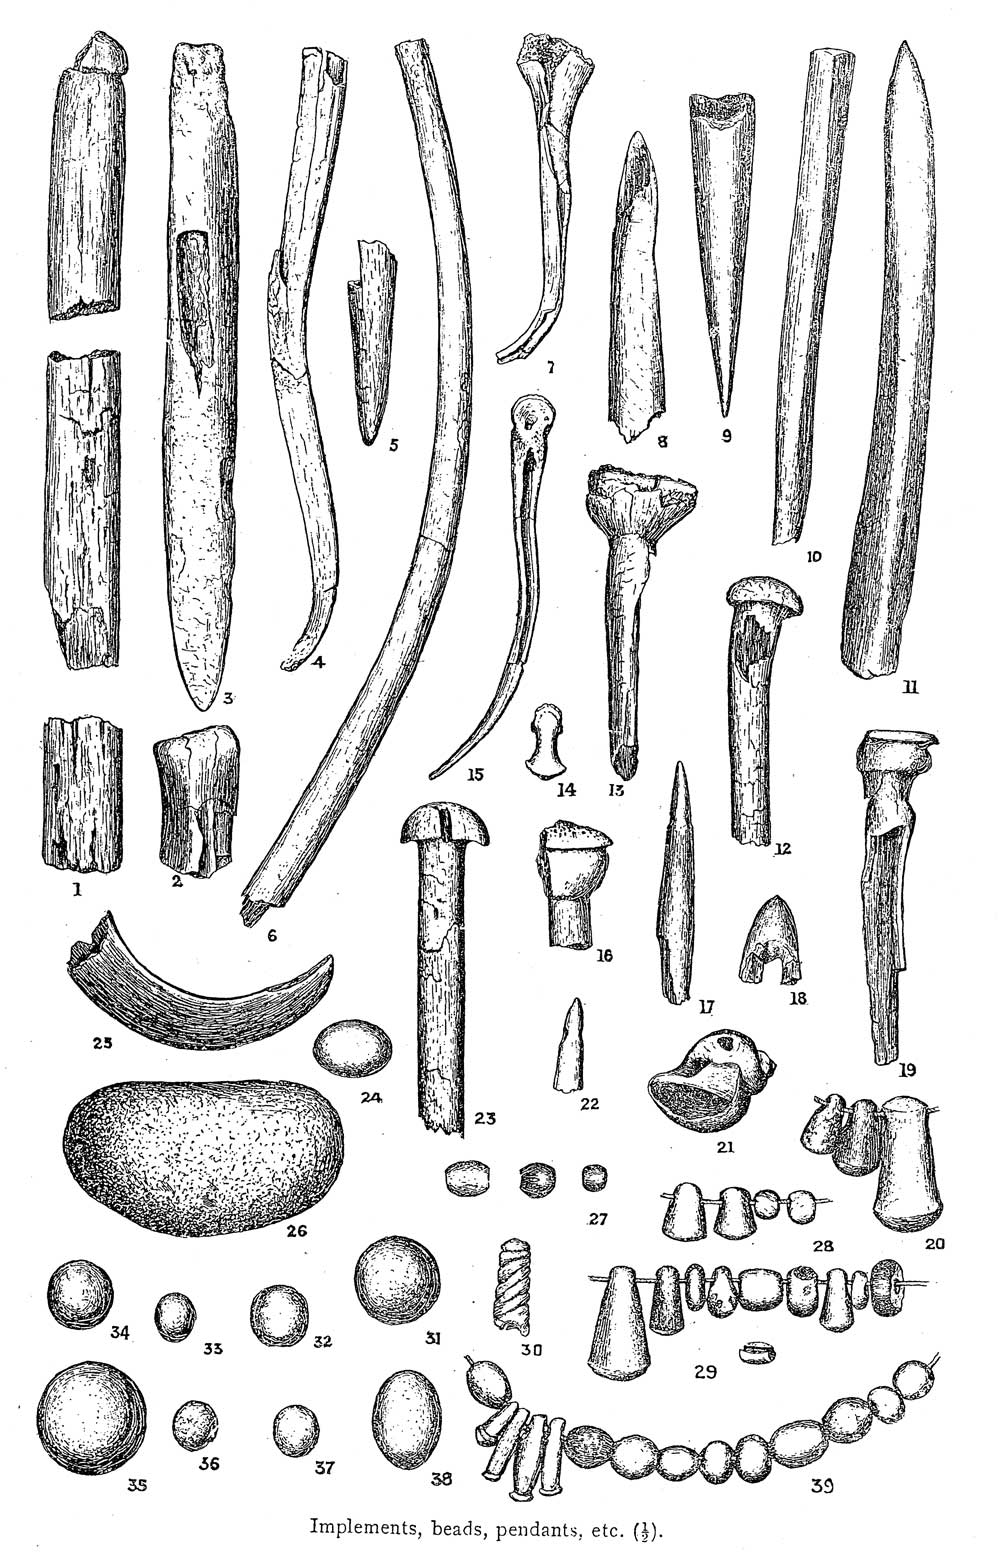 Finds from the chambers at Carrowkeel from 1911.